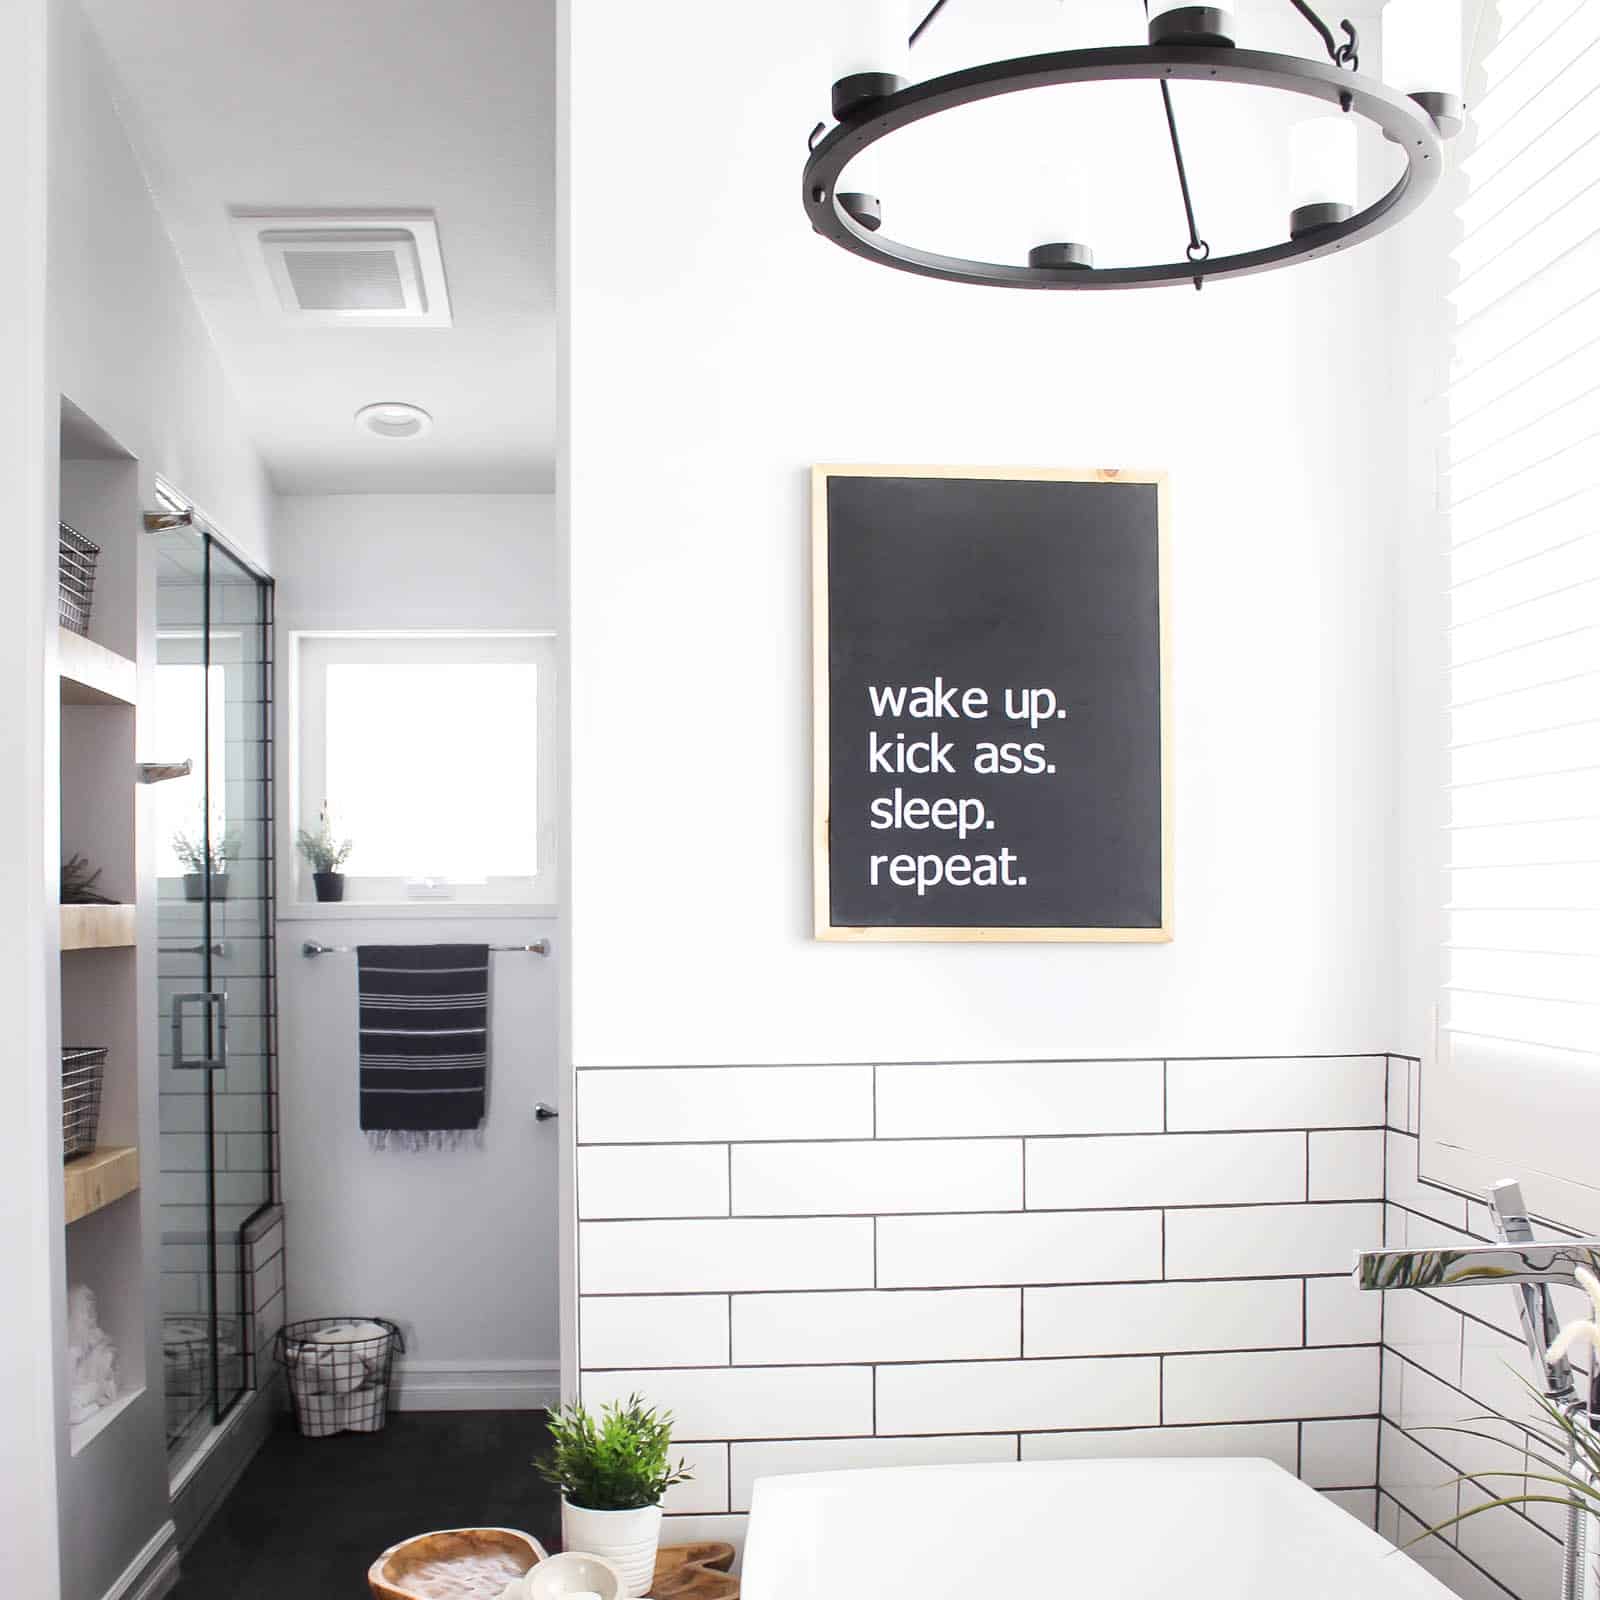 Make your own custom typography canvas with iron-on vinyl and paint. A sleek modern canvas for your bedroom or bathroom. Love the 